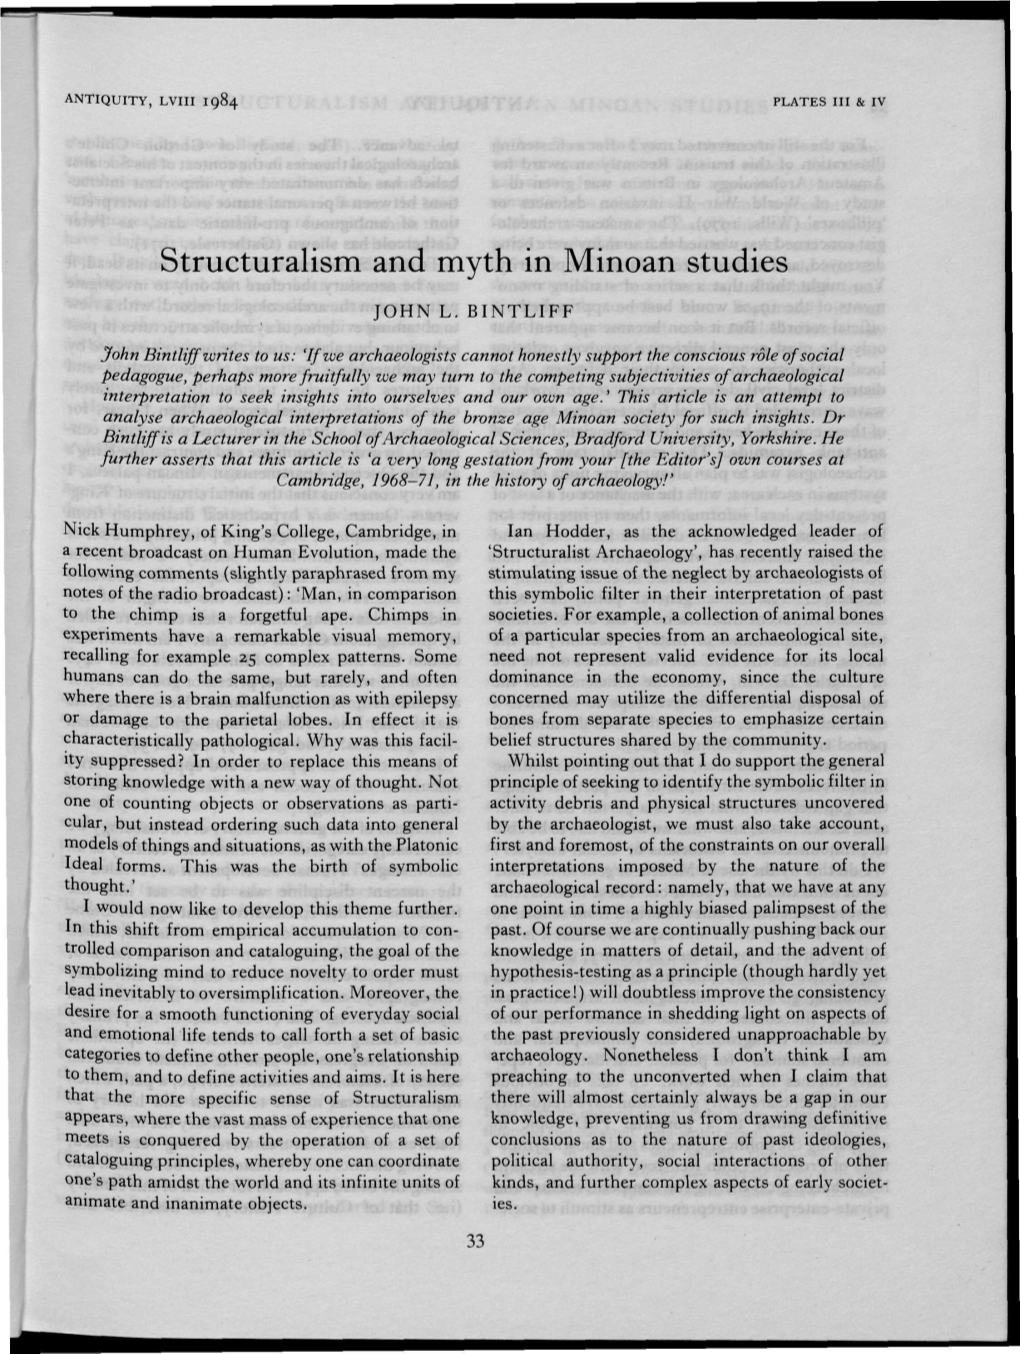 Structuralism and Myth in Minoan Studies